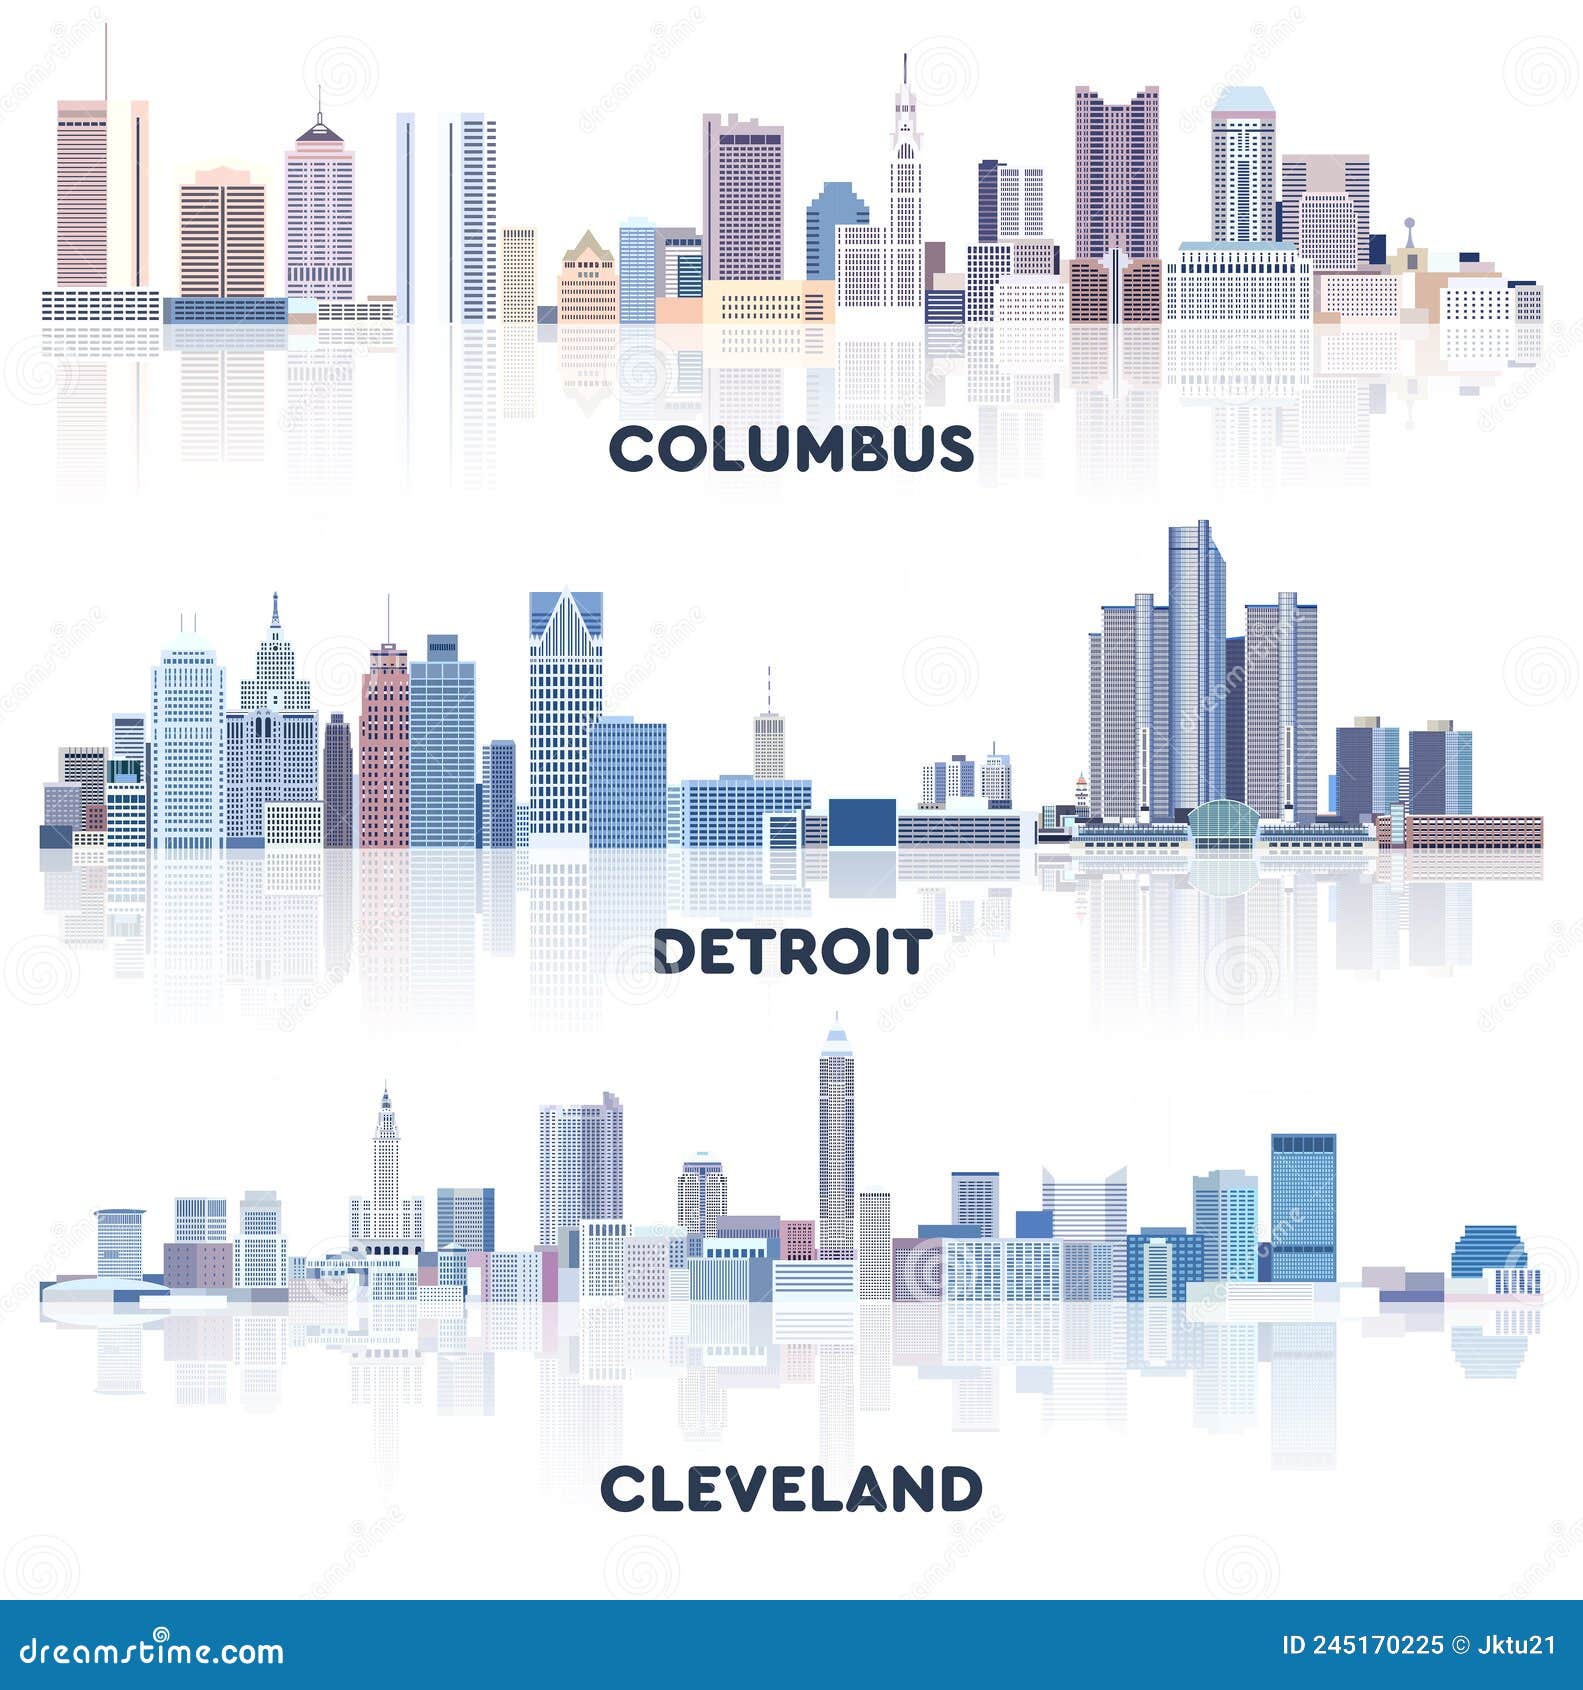  collection of united states cityscapes: columbus, detroit, cleveland skylines in tints of blue color palette. ÃÂ¡rystal